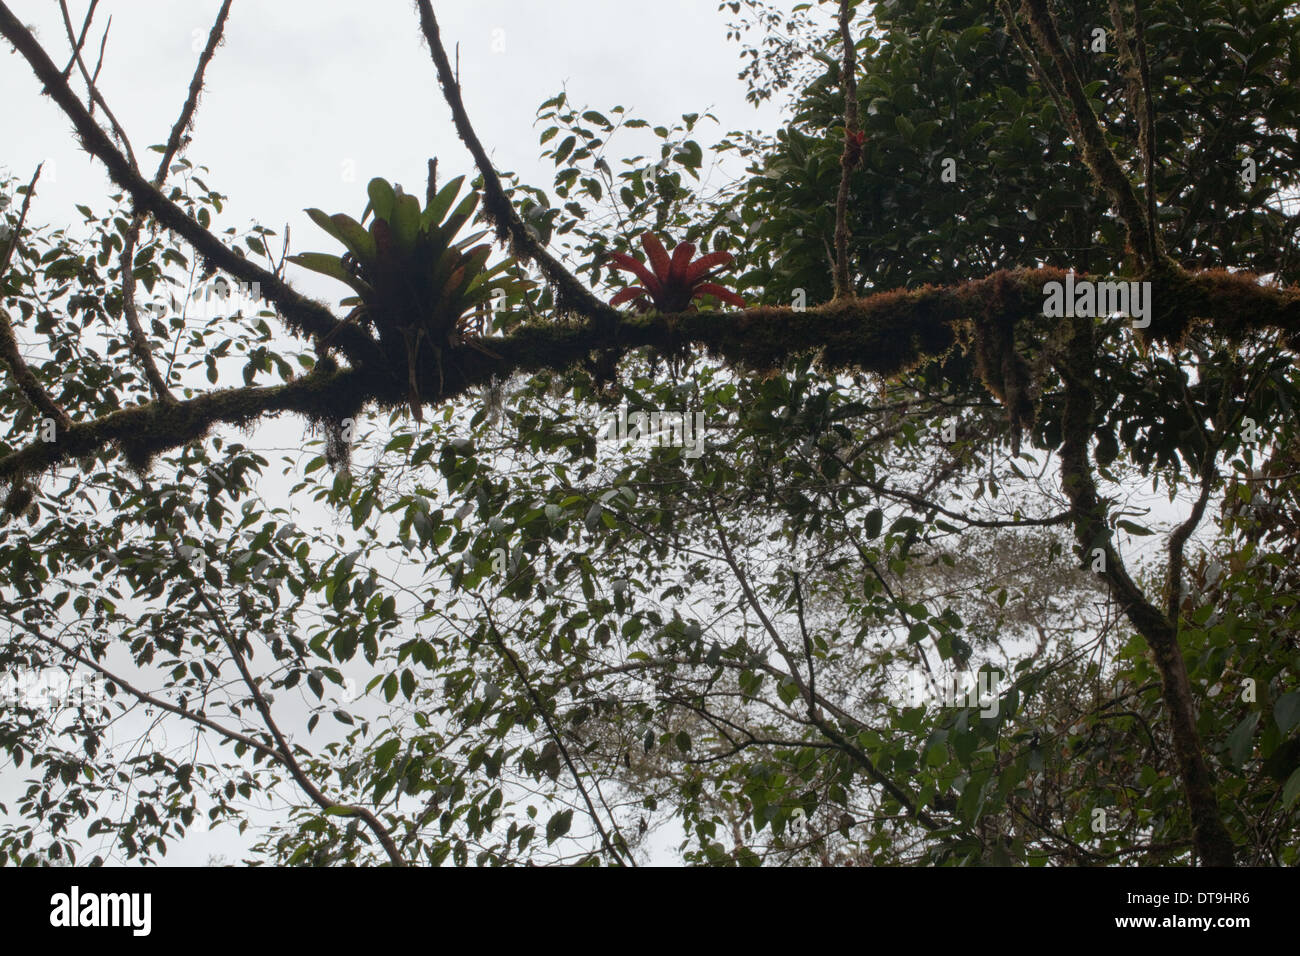 Bromeliads. Mosses. Epiphyte. Growing and supported by a host tree. Savegre. San Gerardo de Doto. Costa Rica. Stock Photo